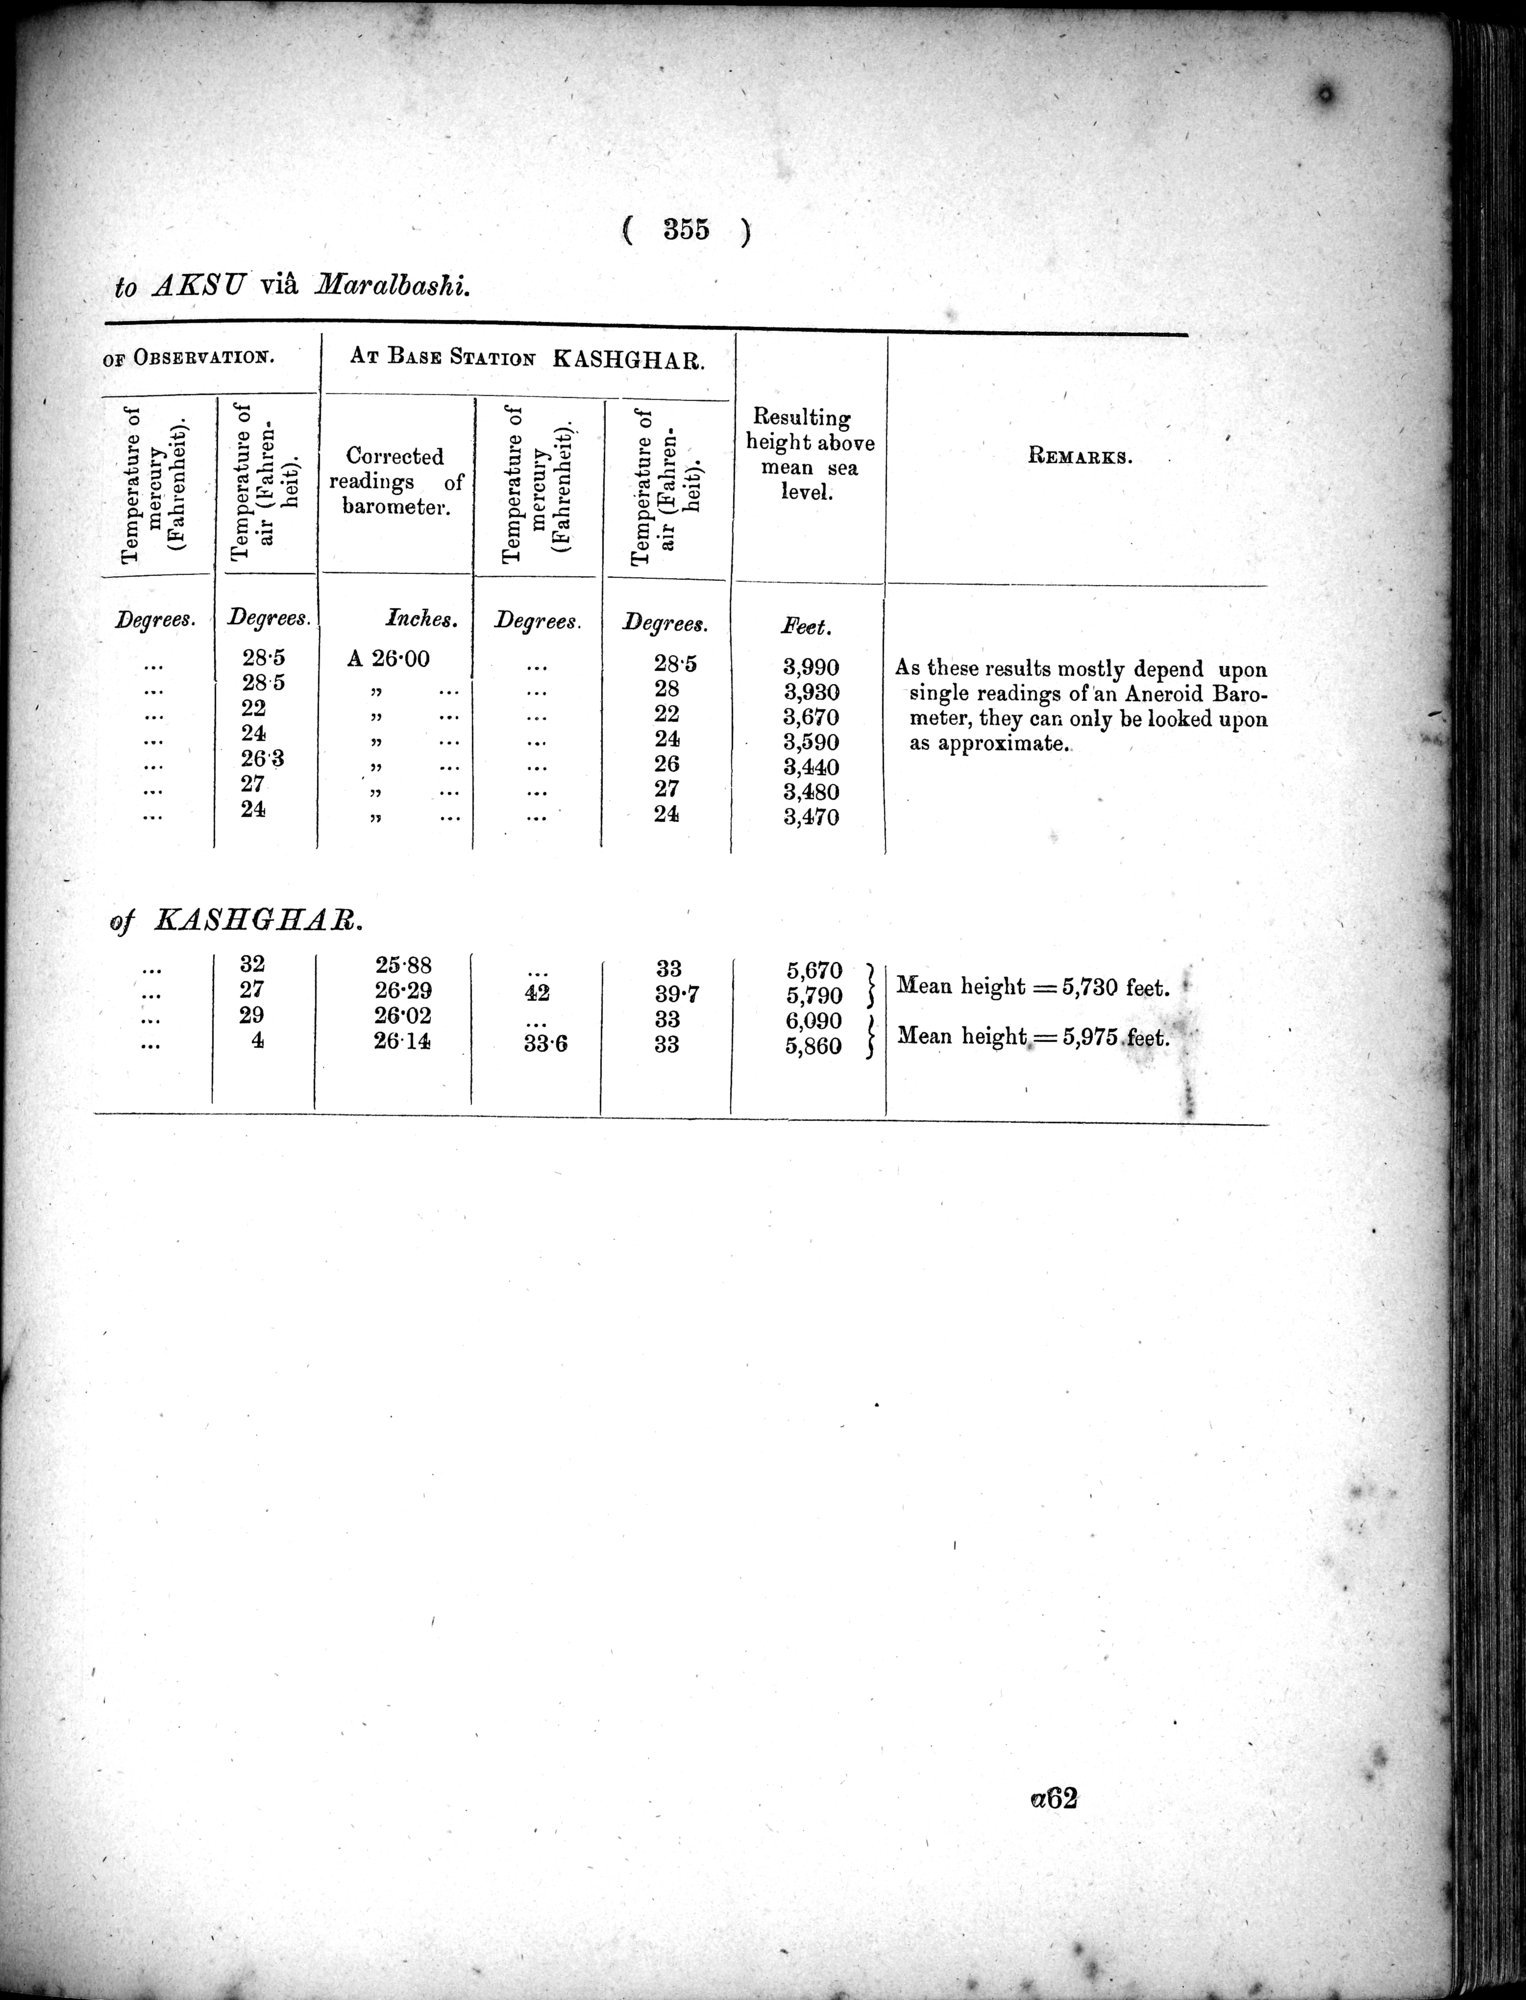 Report of a Mission to Yarkund in 1873 : vol.1 / Page 489 (Grayscale High Resolution Image)